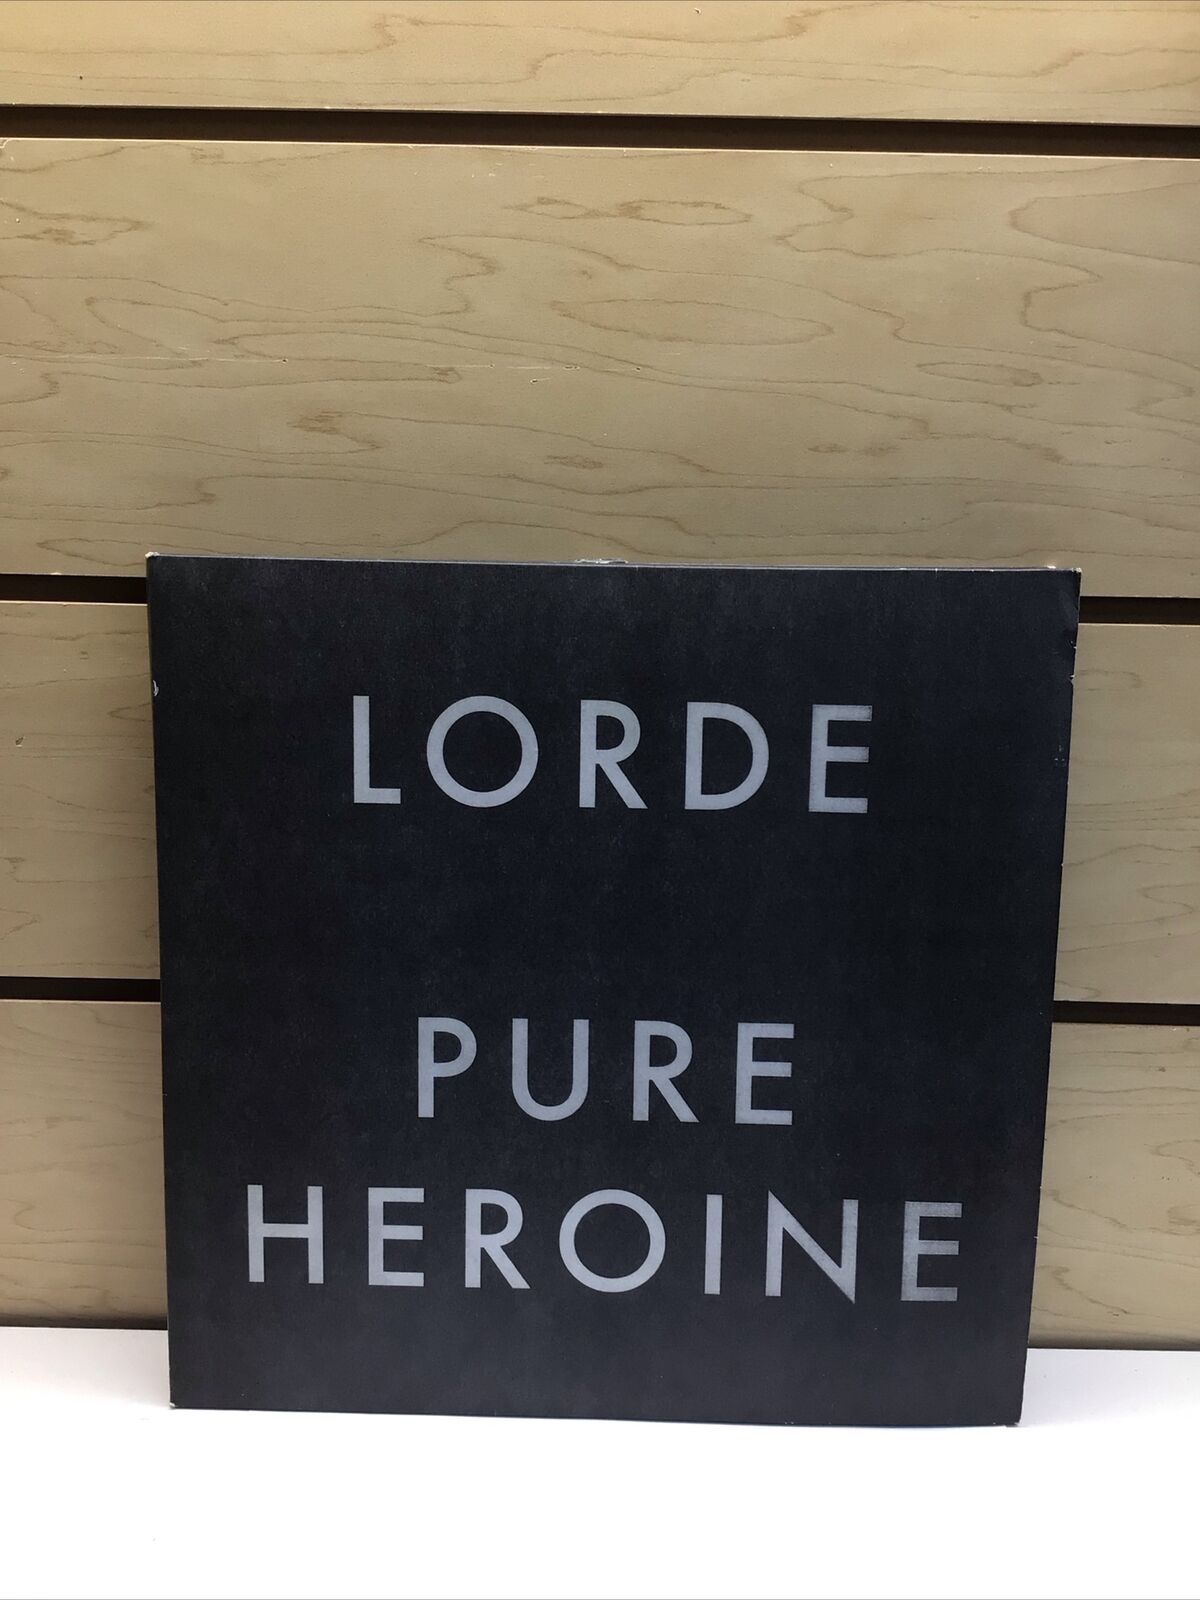 Pure Heroine by Lorde (Record, 2013) VERY GOOD CONDITION